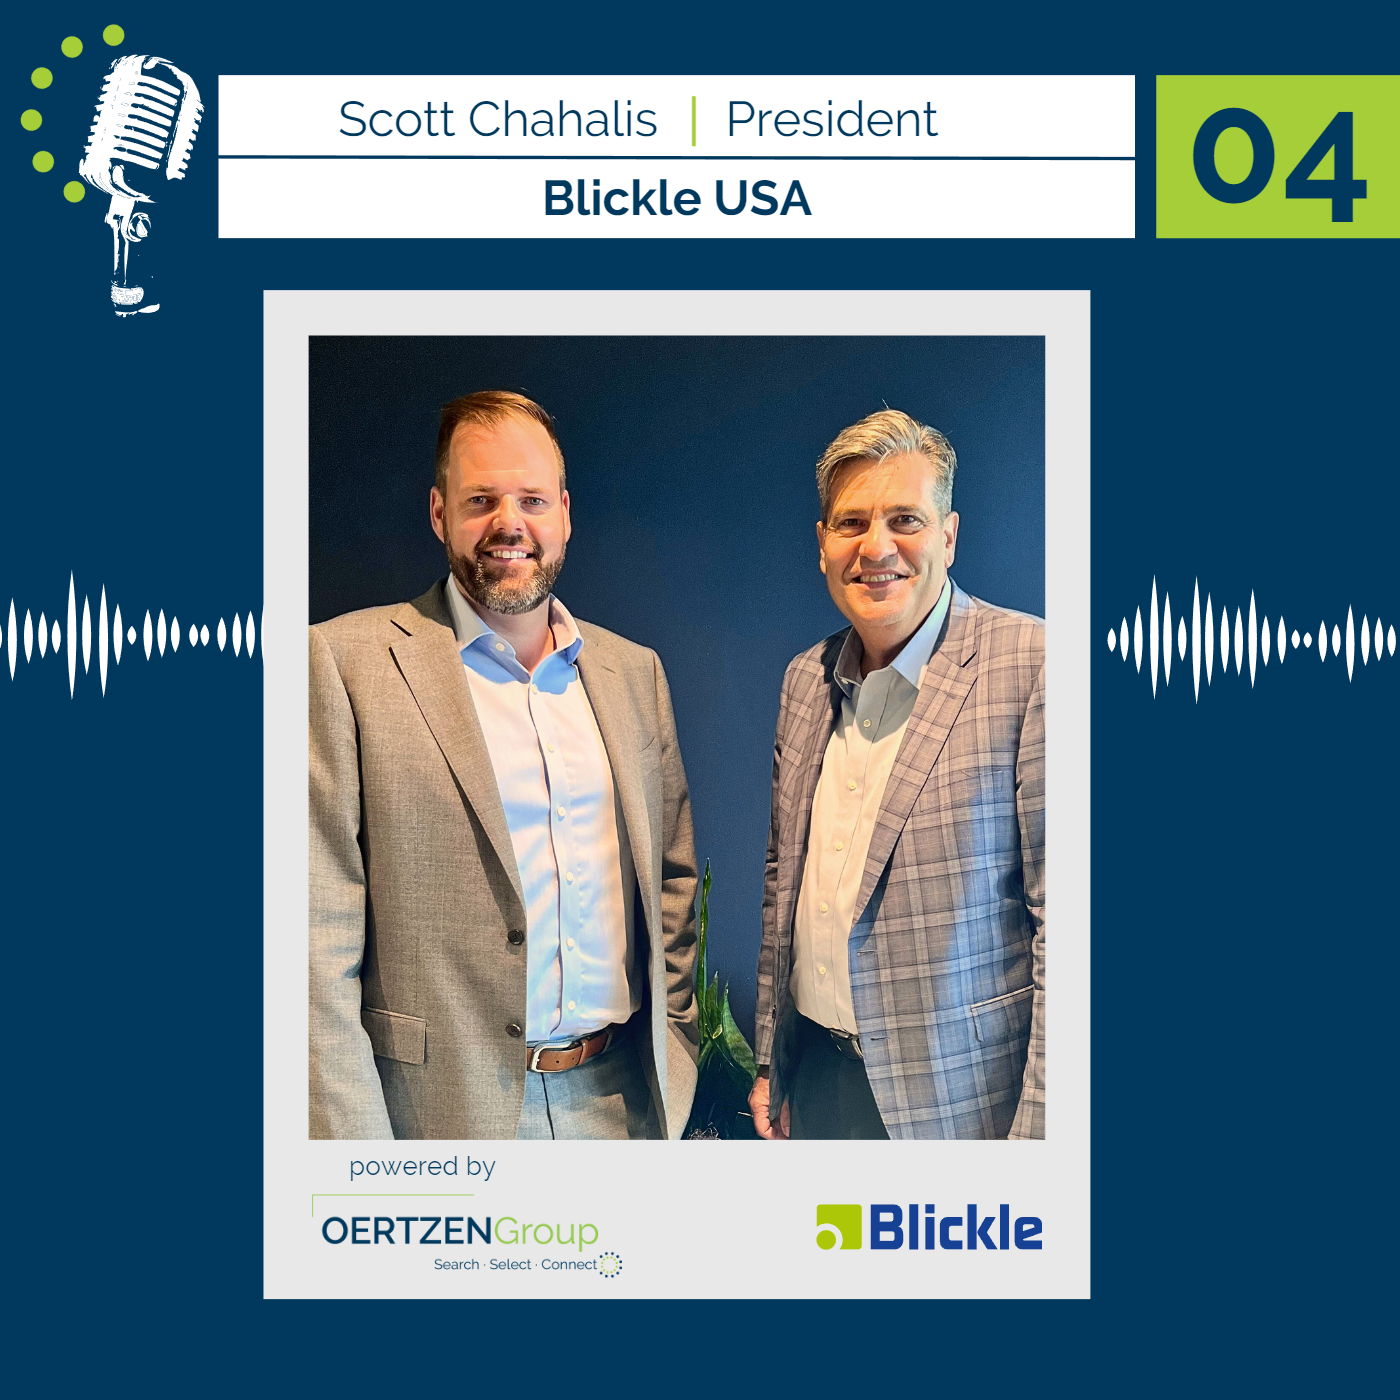 04 - With Scott Chahalis, President of Blickle USA